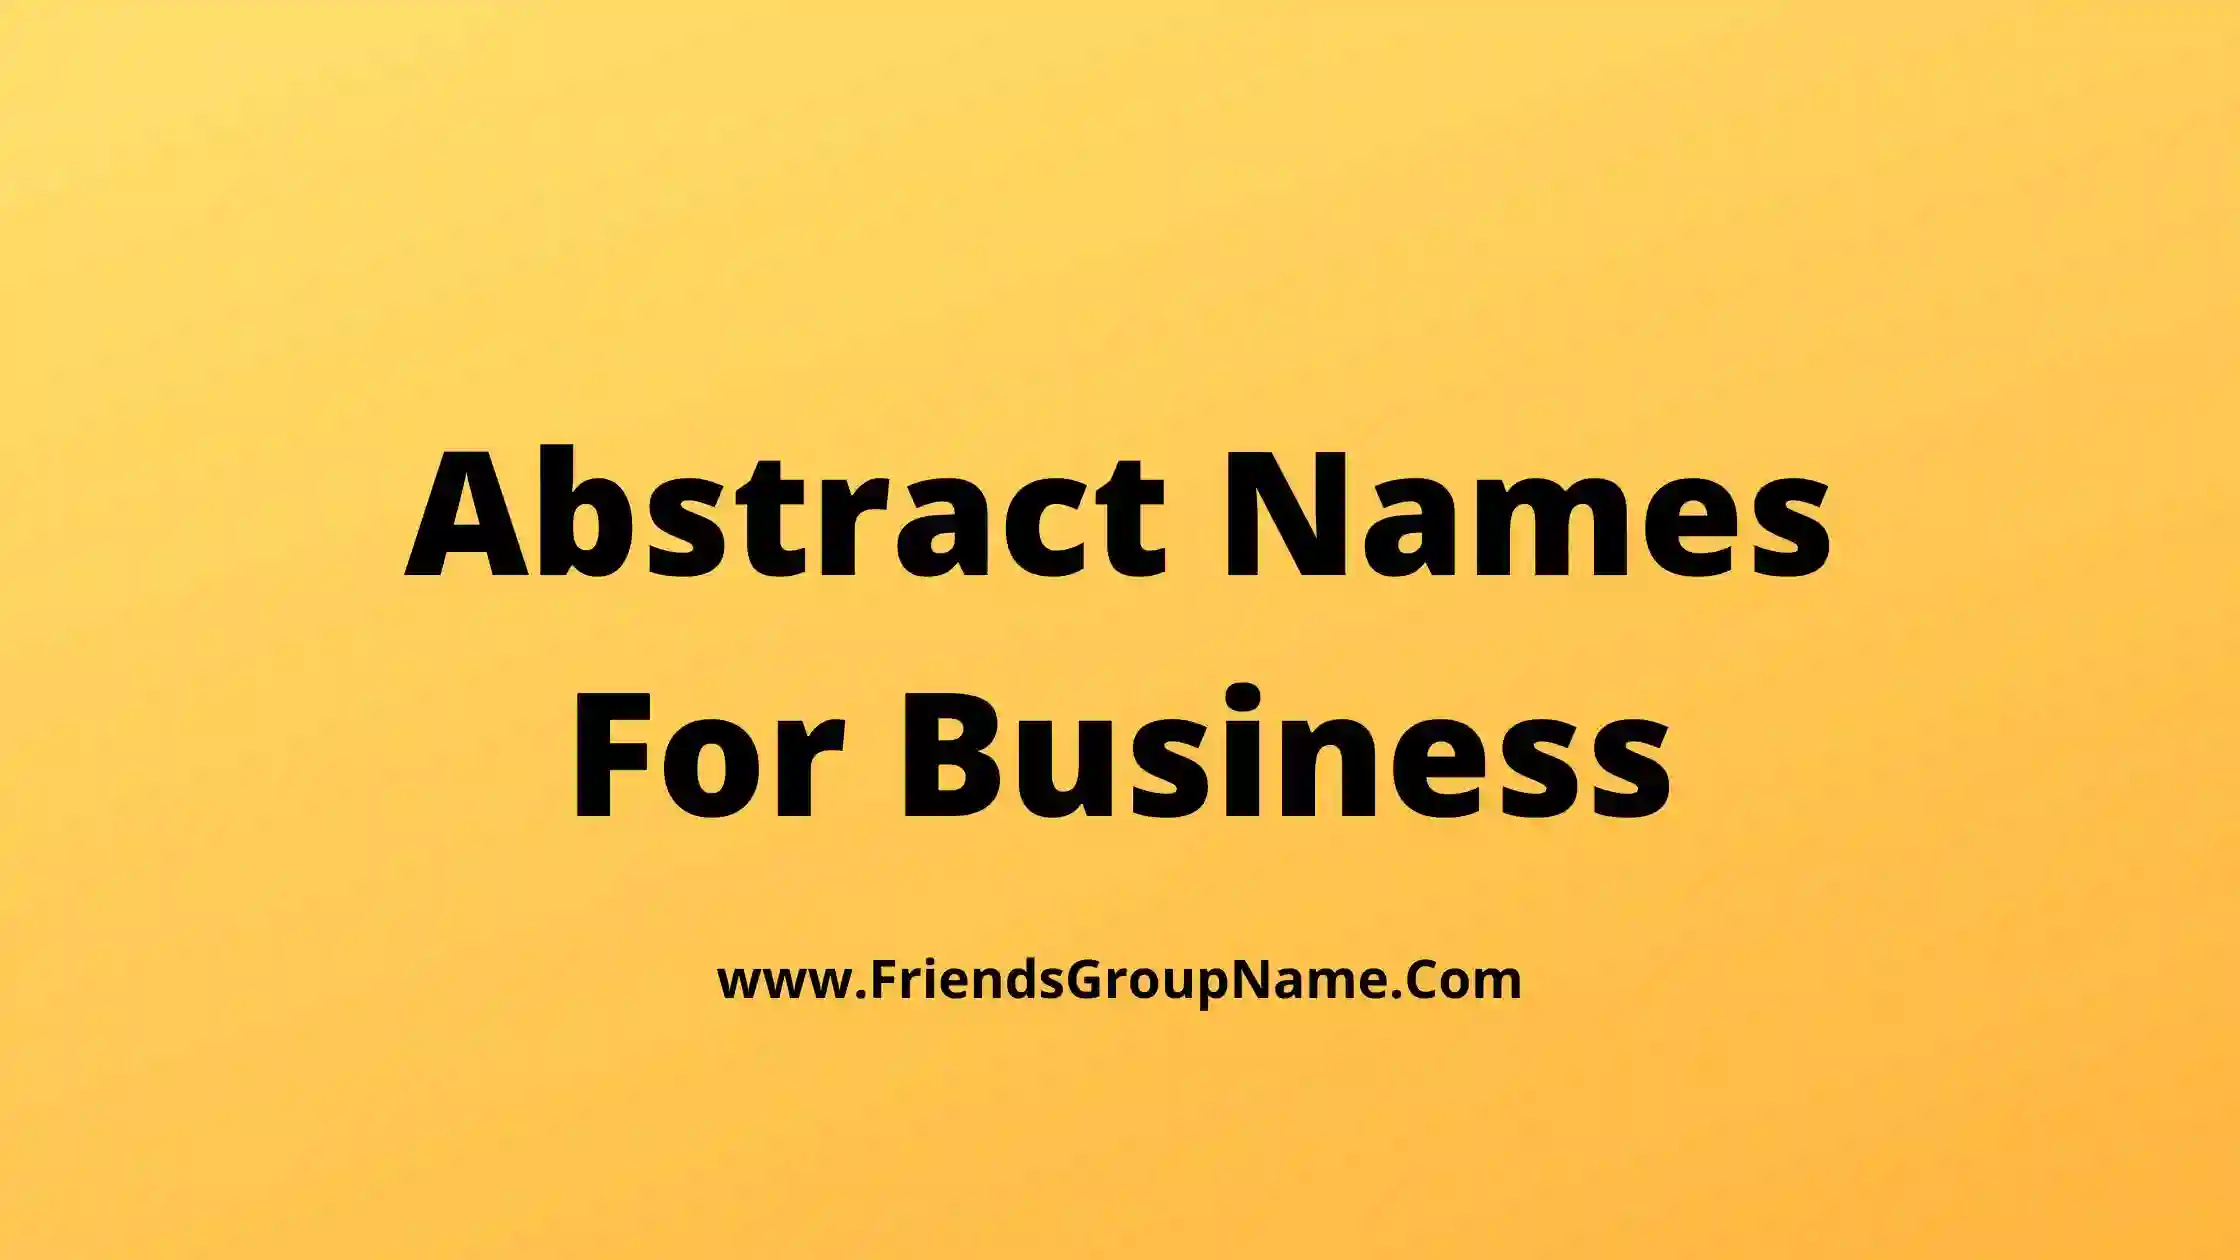 Abstract Names For Business